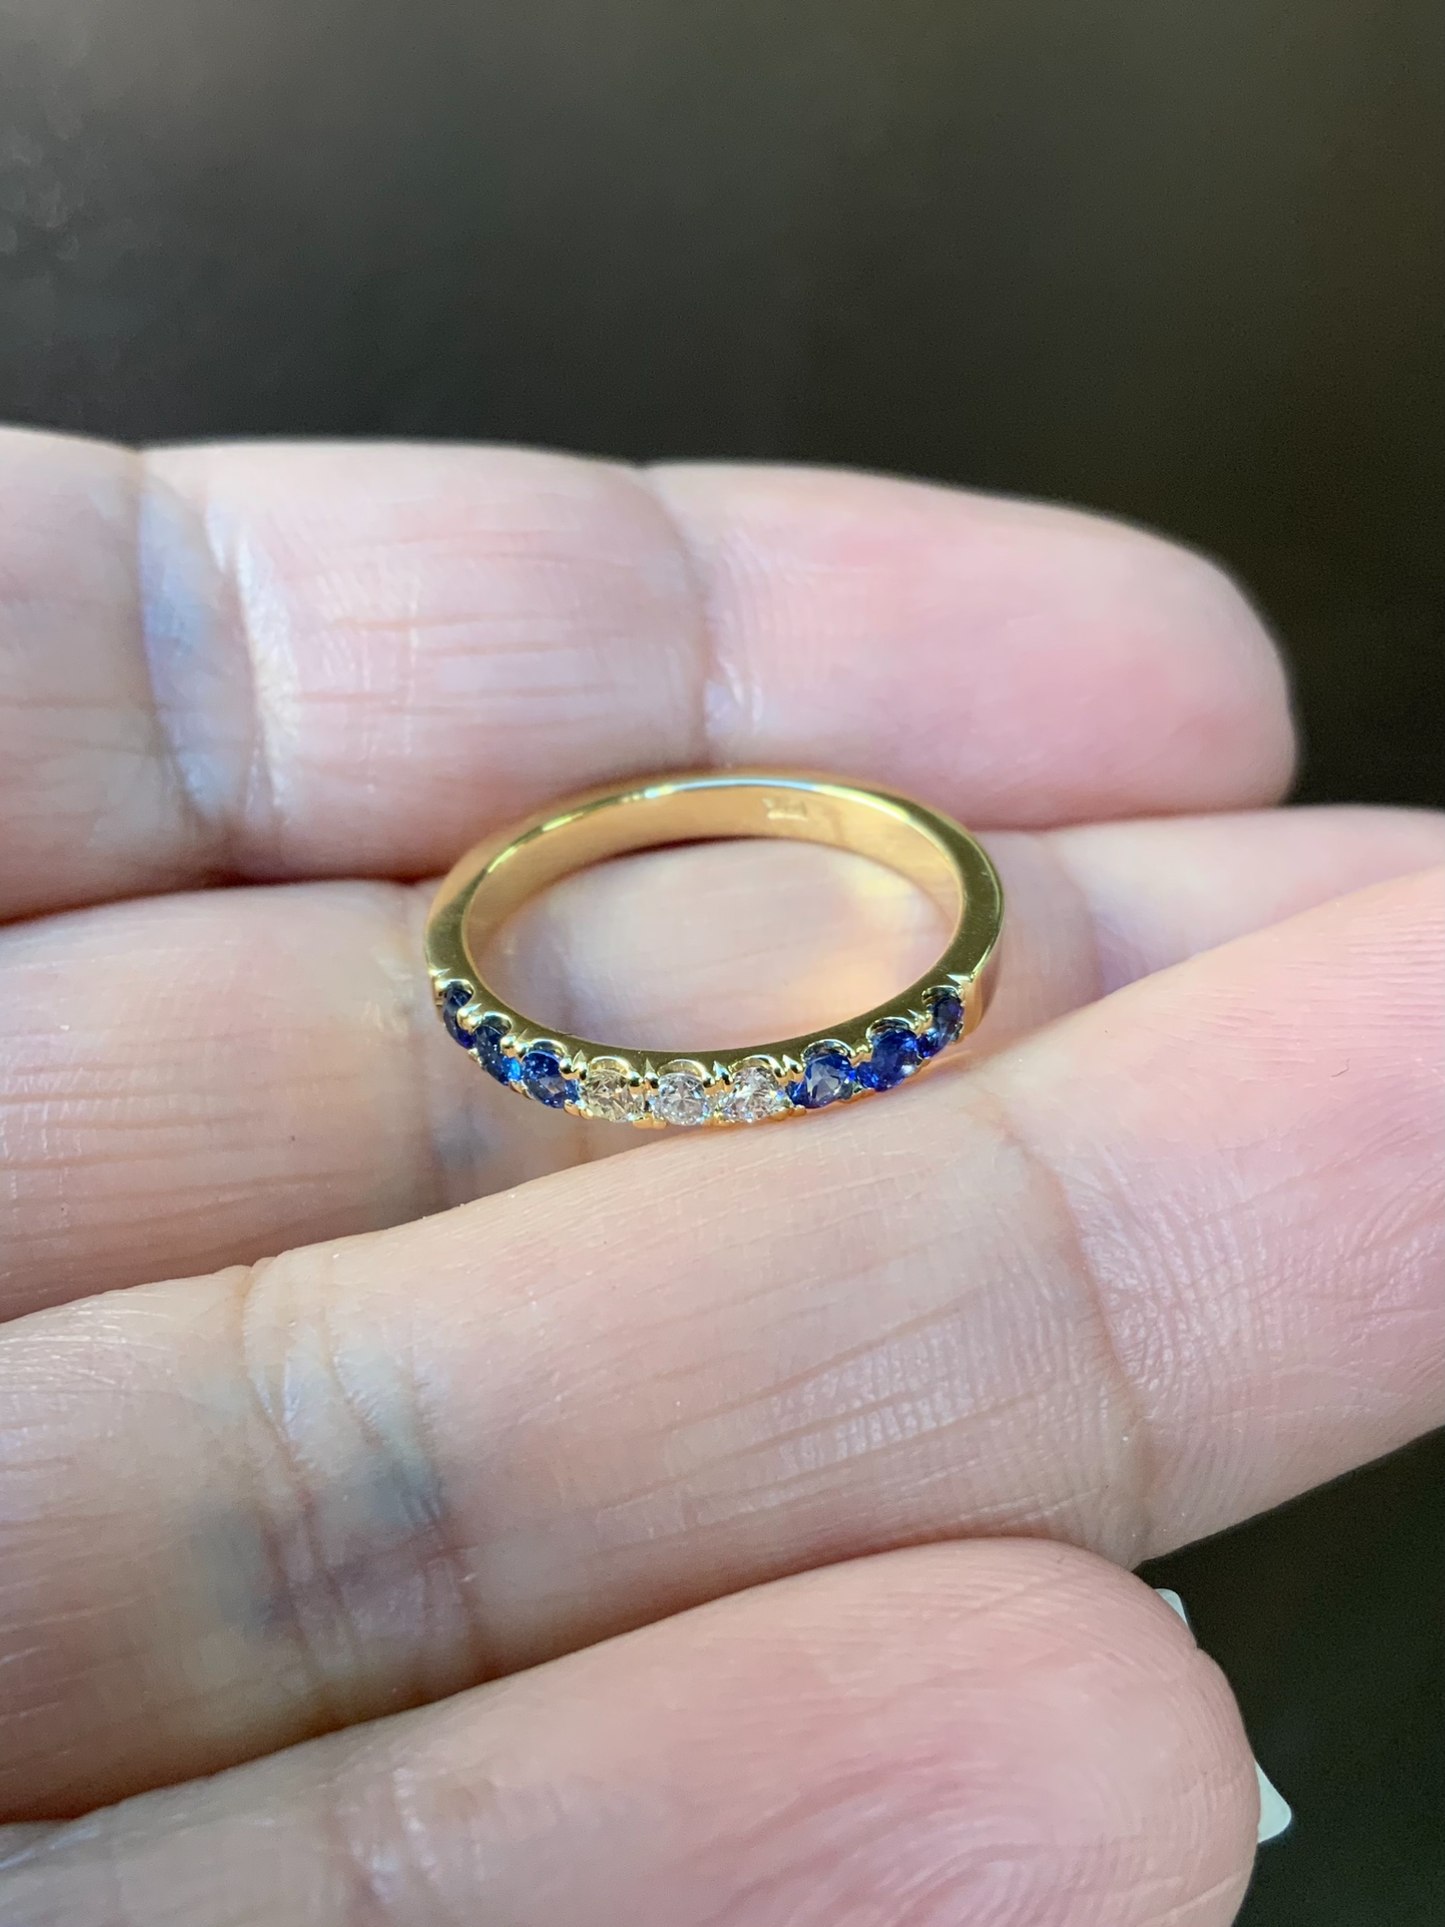 Diamond Band with Gradient Blue Sapphires/ Blue White Ring/ Blue Sapphire and Diamond Pave Ombre Stacking Ring/ 2.3mm Unique Wedding Band/ 9-Stone Diamond Blue Sapphire Band